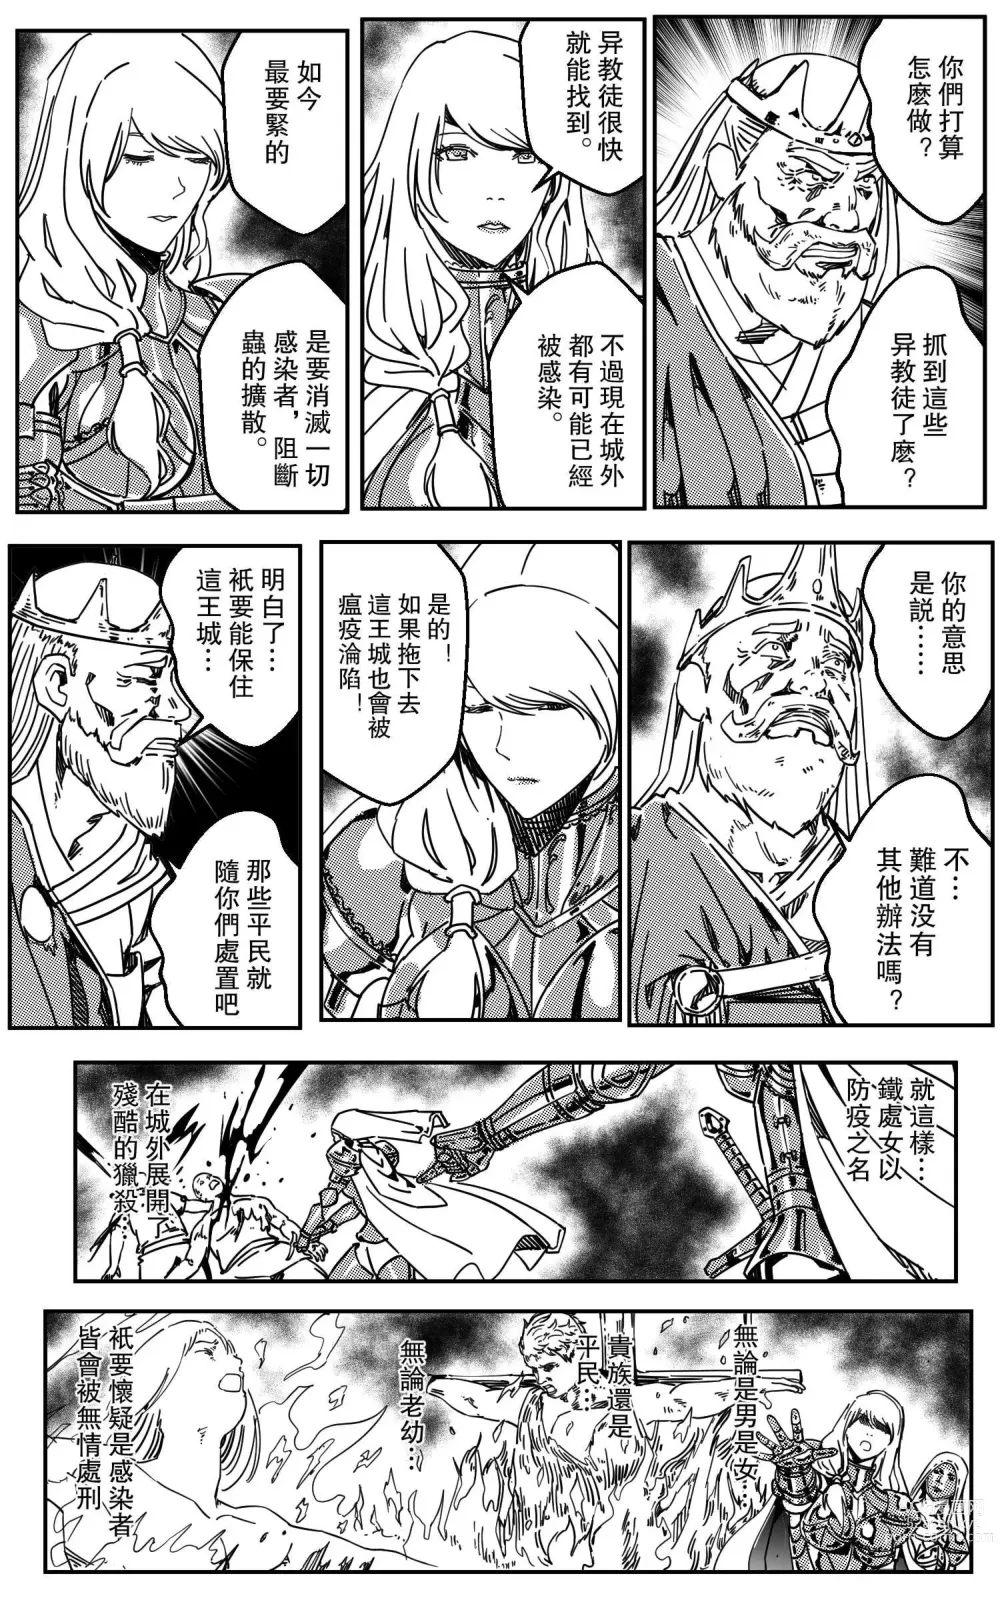 Page 9 of doujinshi 鉄處女/Ironmaiden 01-03（已腰斬）